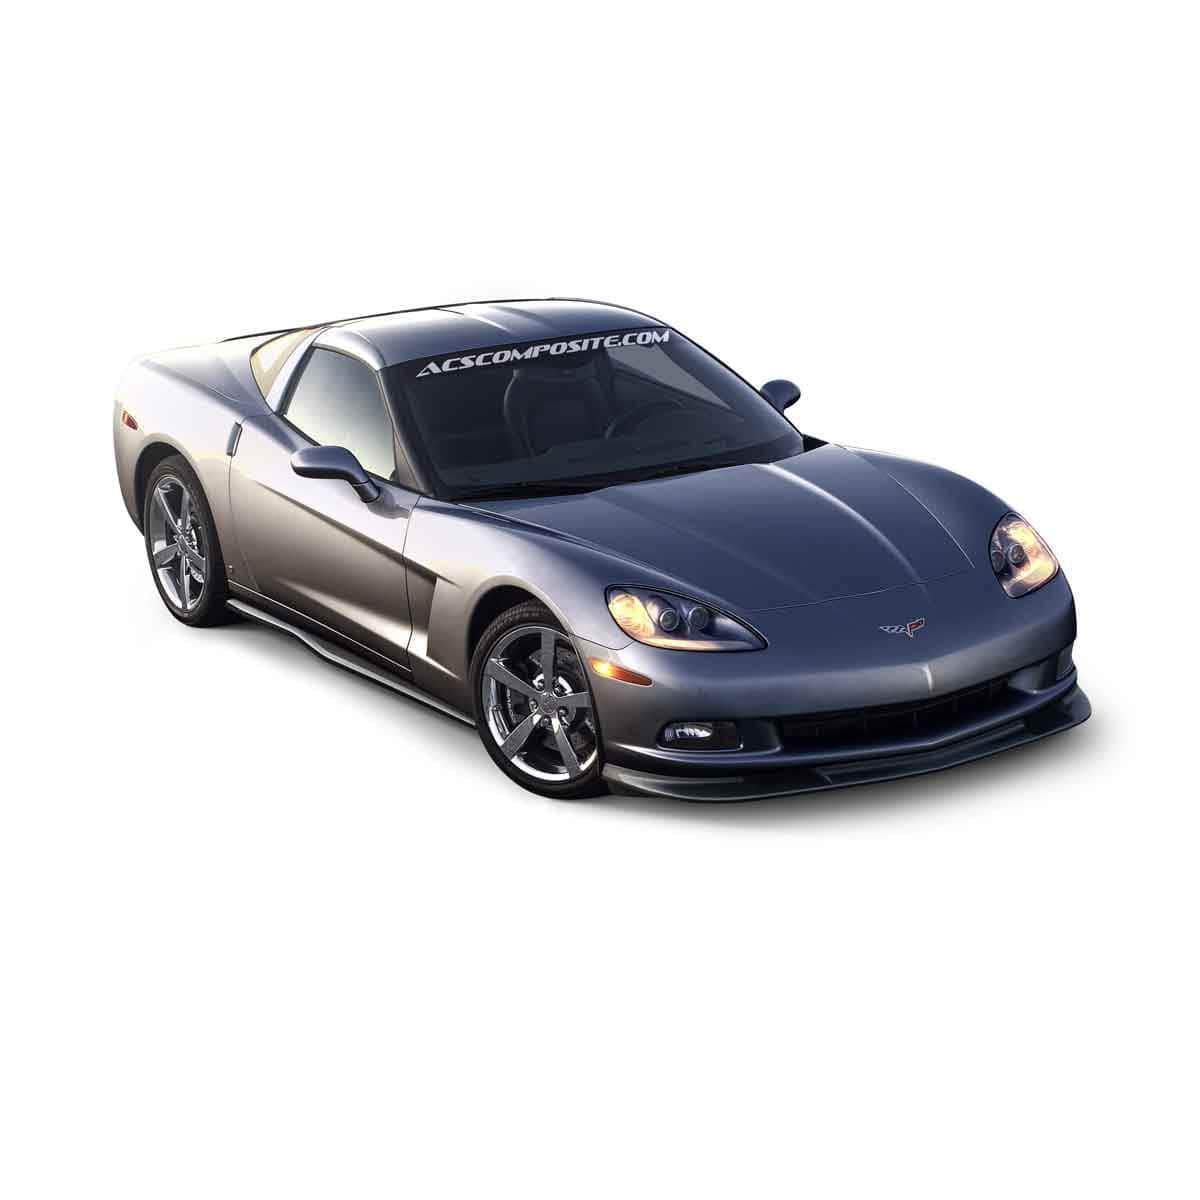 ACS Composite Zero6 Front Deflectors for C6 Corvette Base 27-4-039: High-quality RTM Composite construction with brake cooling inlets for enhanced performance and sleek Carbon Flash Black finish.